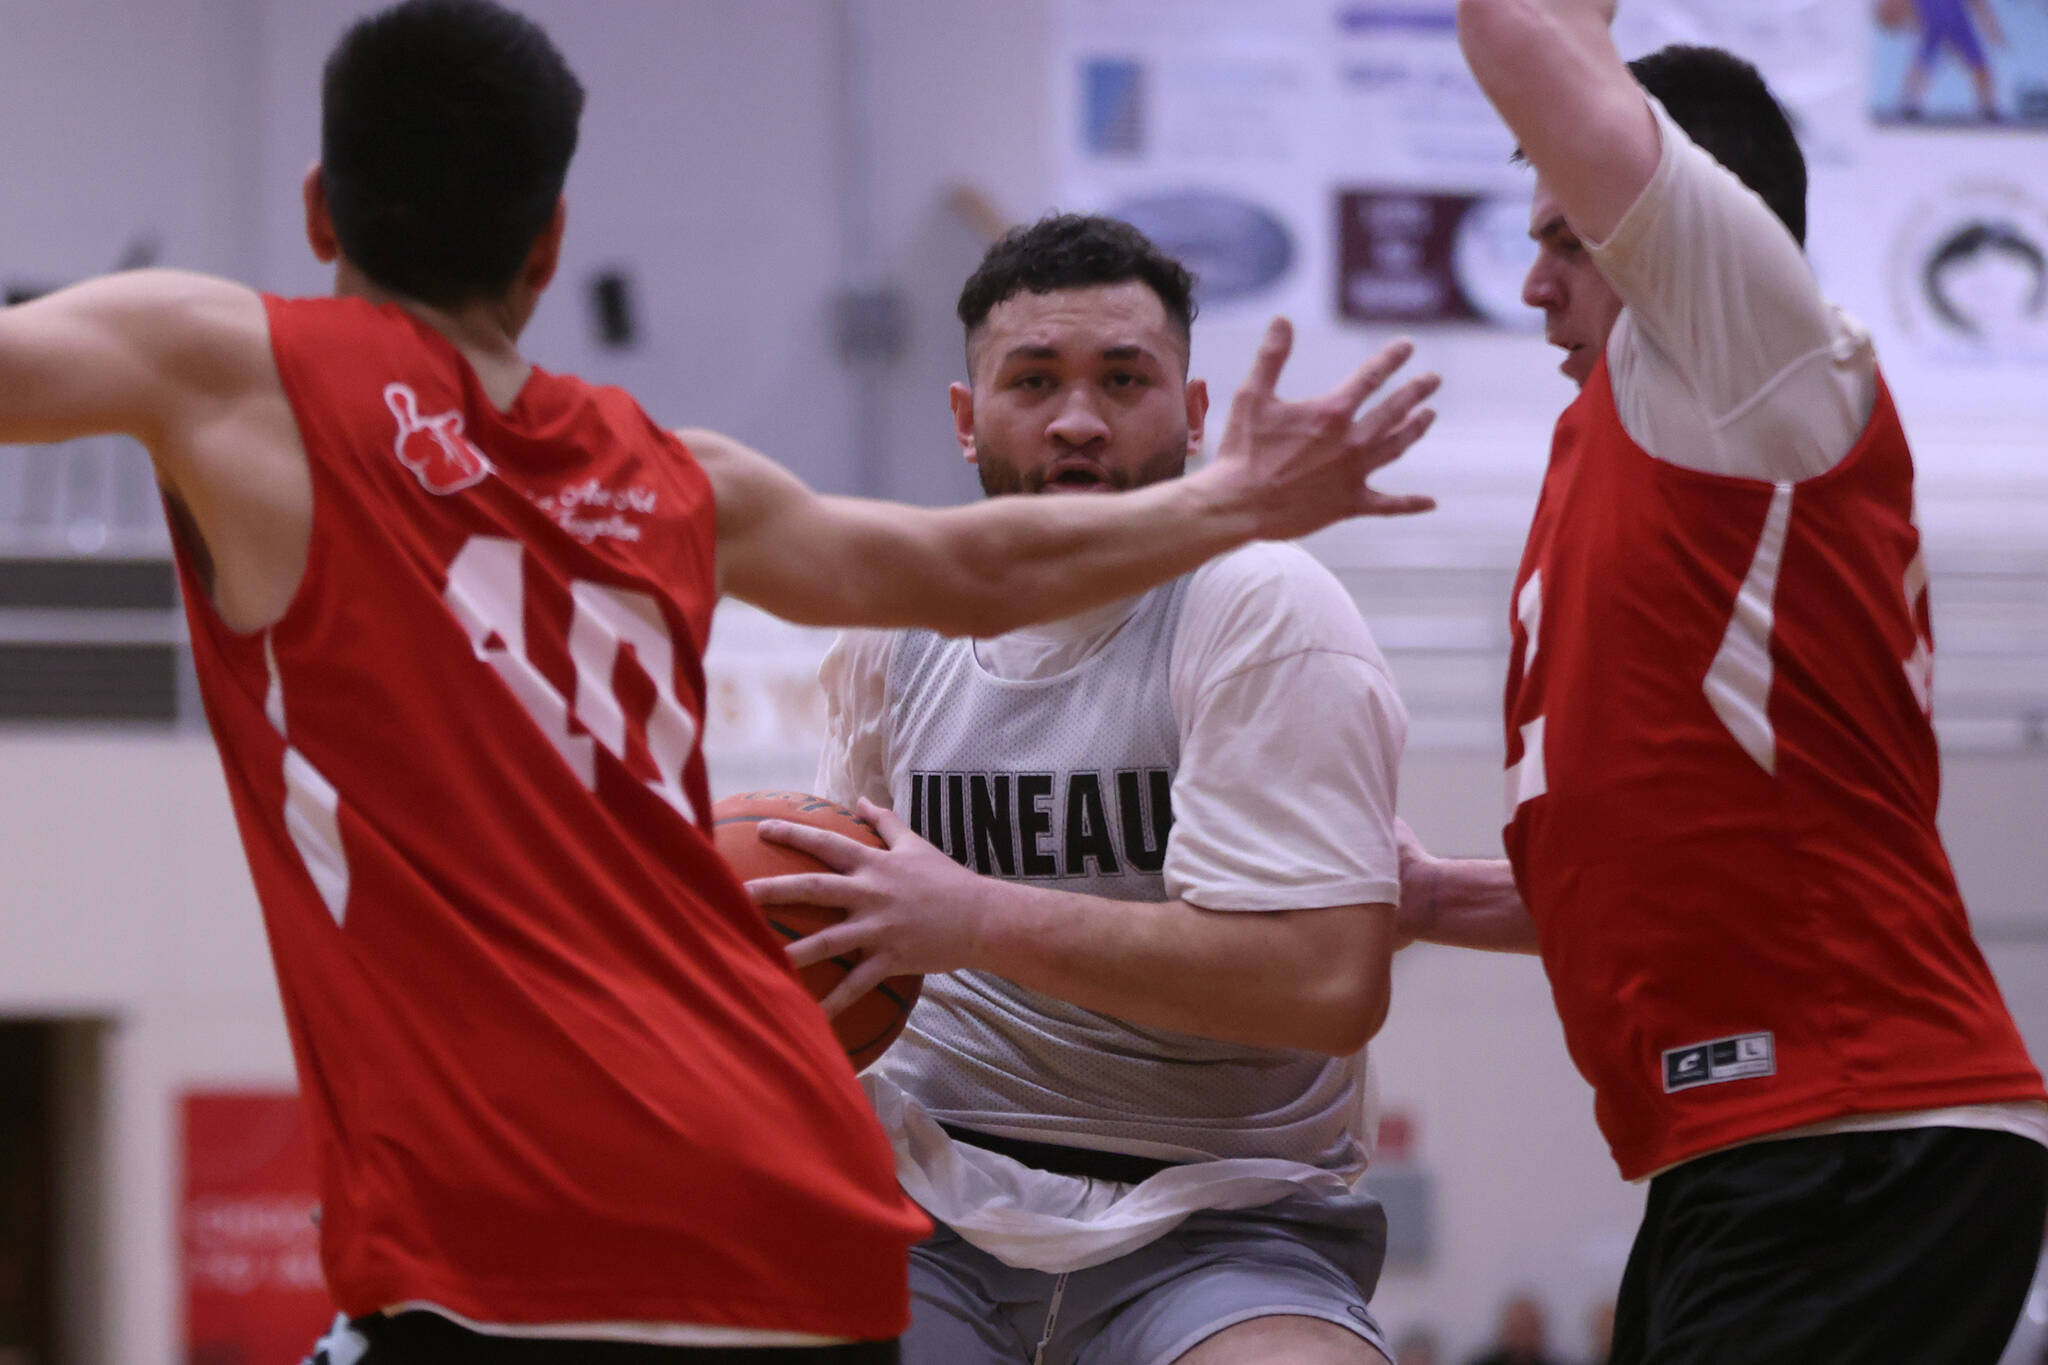 Juneau's Mahina Toutaiolepo peers through the arms of Kake defenders during the second half of a Juneau win in the Juneau Lions Club's 74th Gold Medal Basketball Tournament. (Ben Hohenstatt / Juneau Empire)